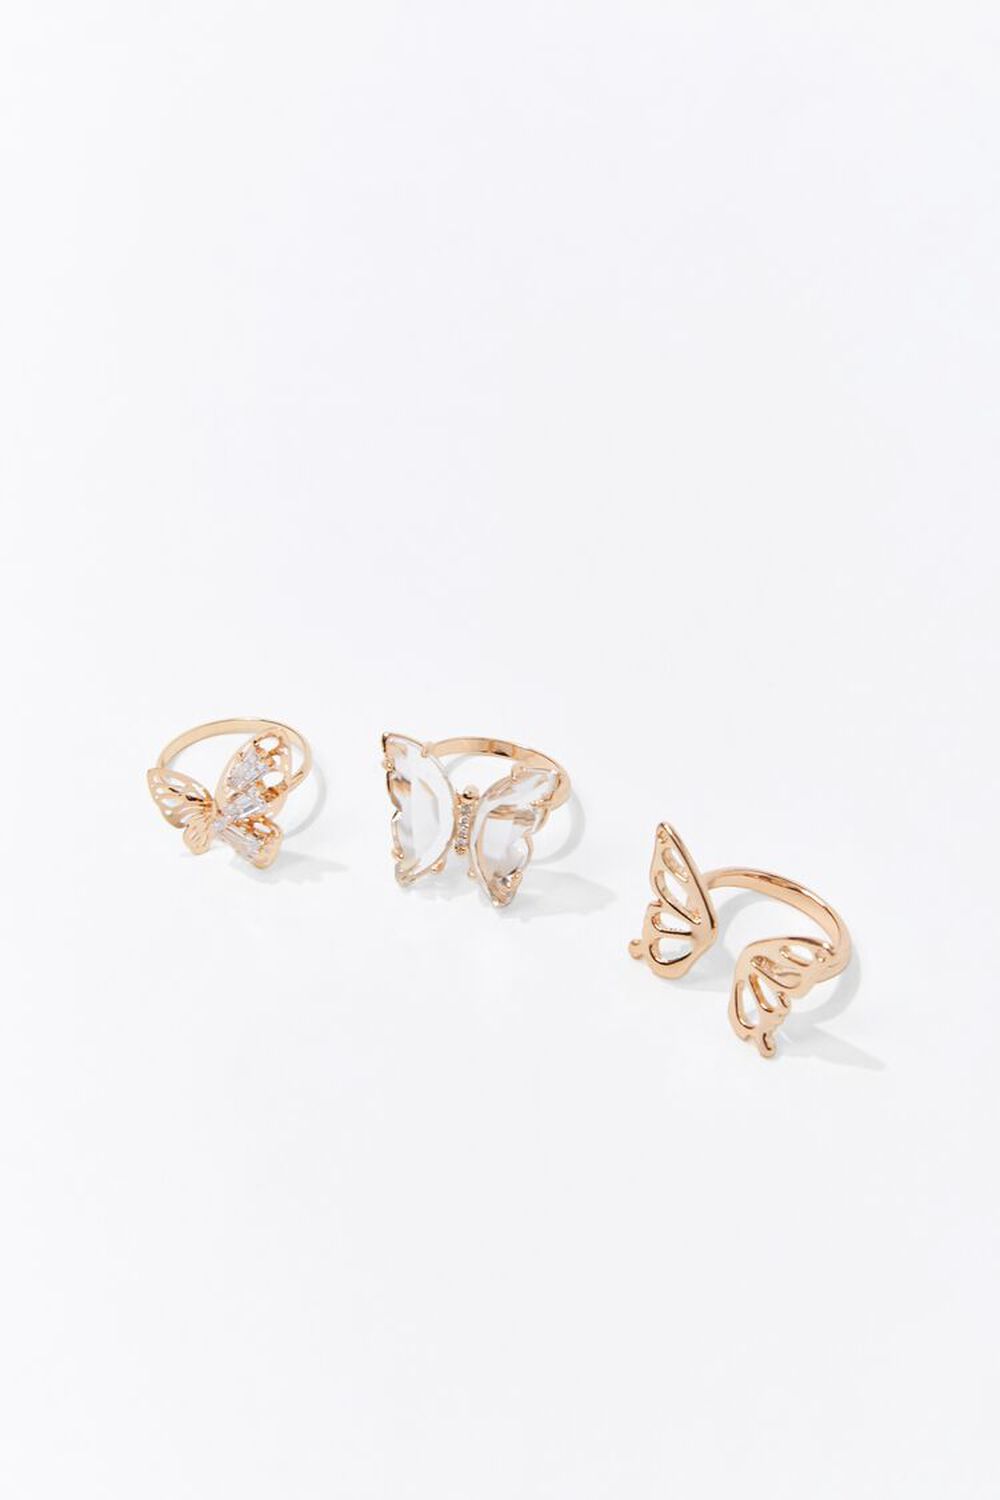 GOLD Butterfly Charm Ring Set, image 1